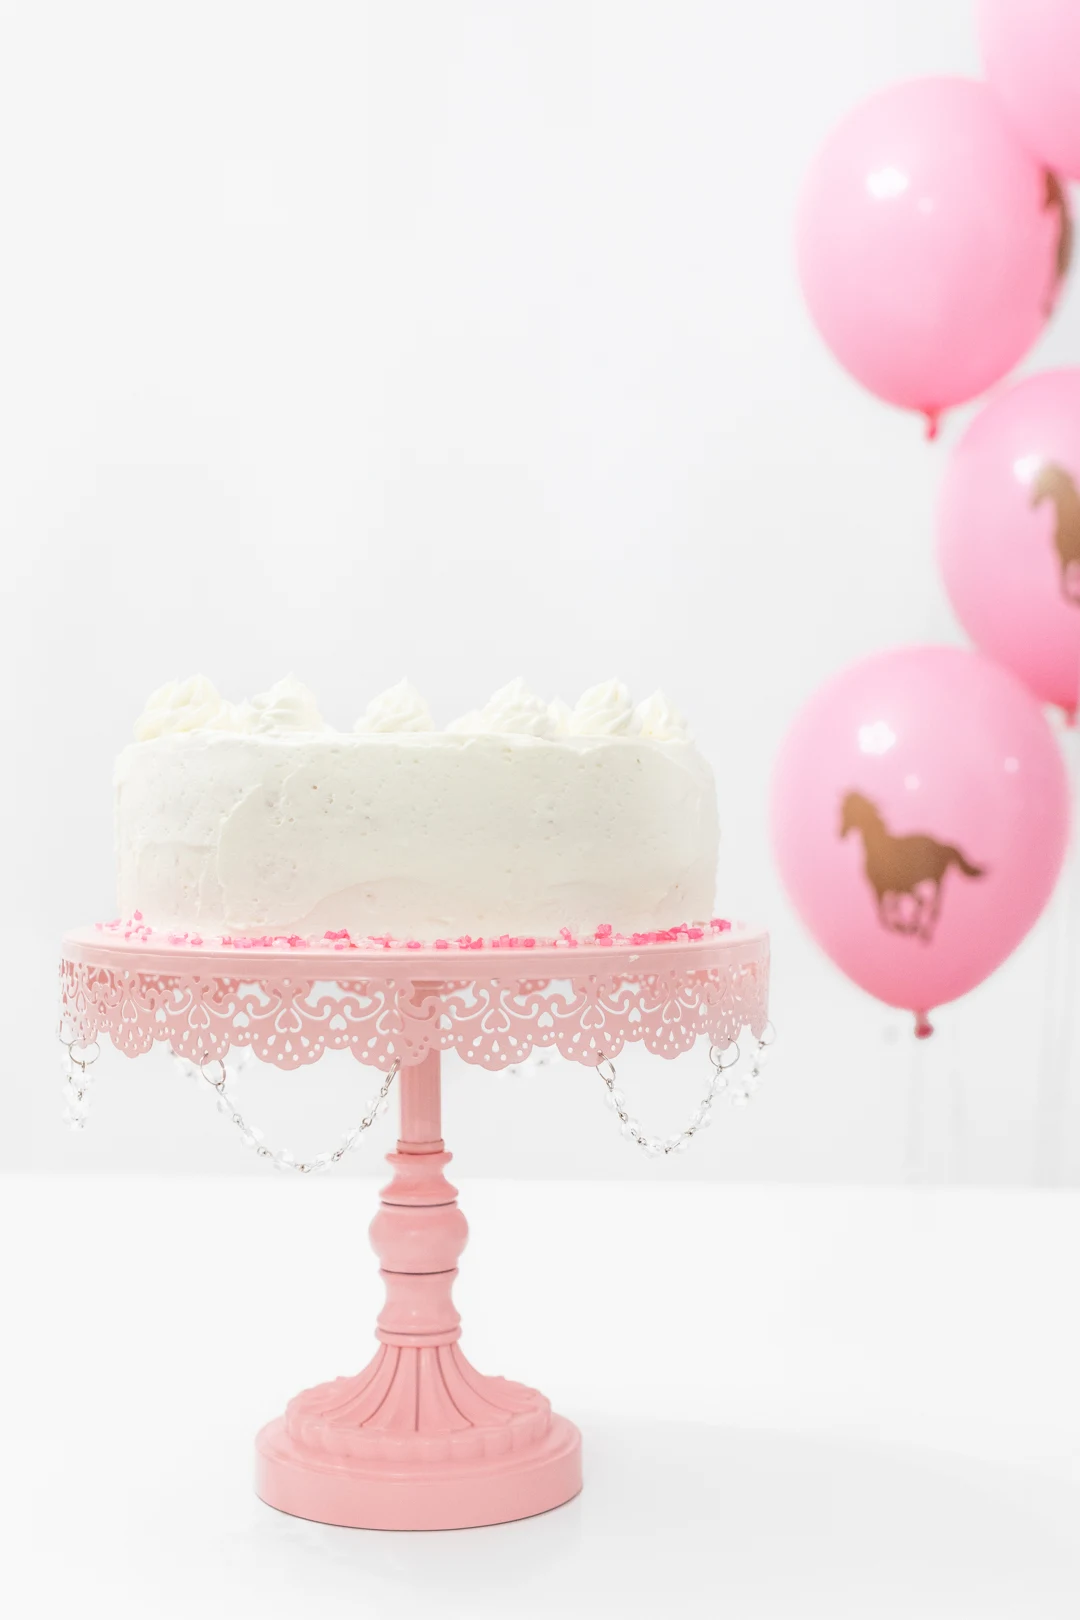 White cake on pretty pink cake stand. Horse balloons.